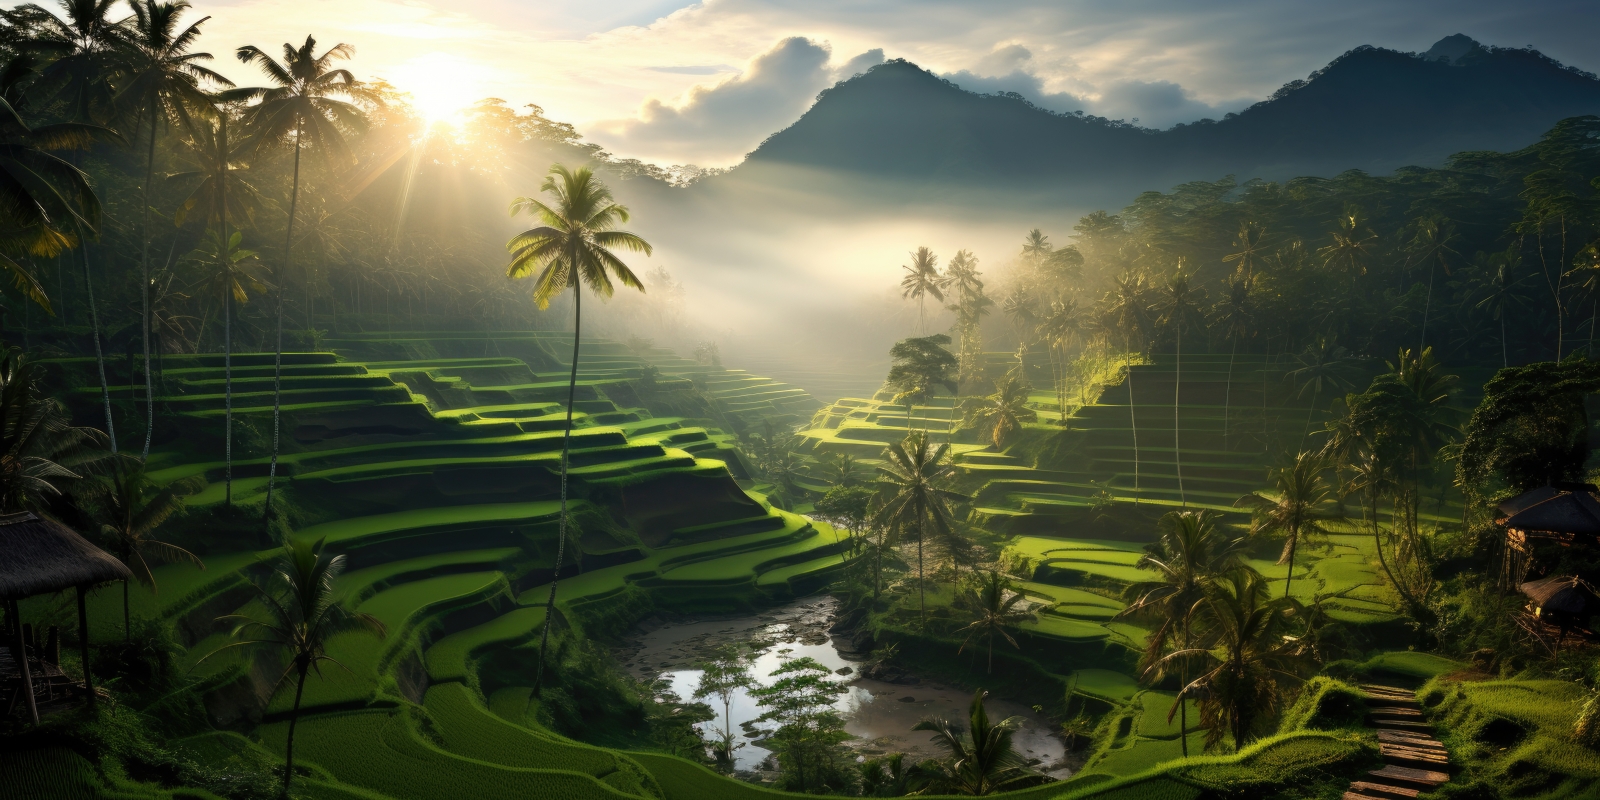 Benefits of buying property in Bali